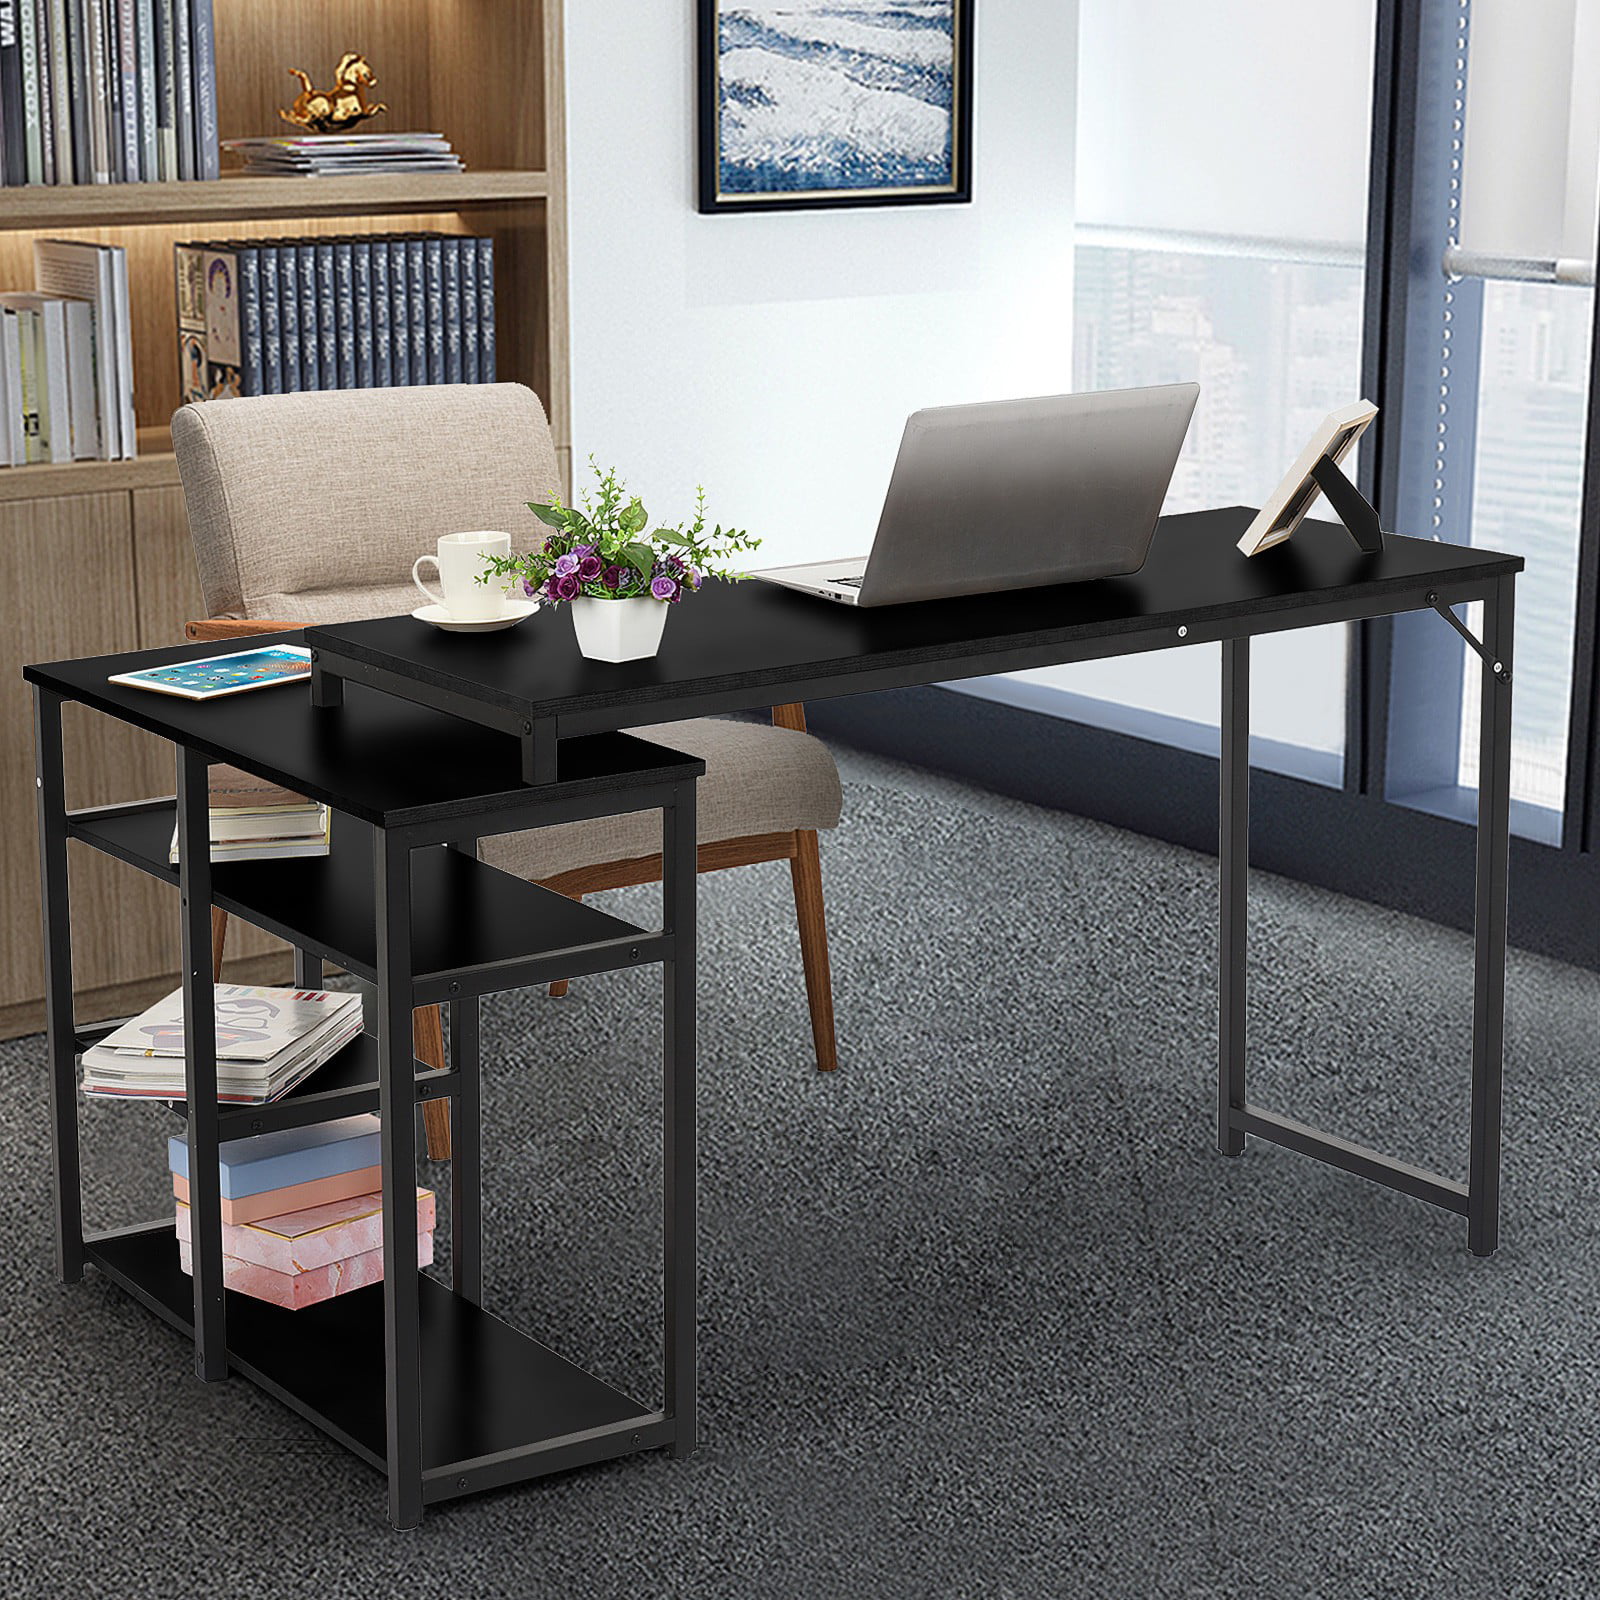 Details about   L-Shaped Computer Desk With Storage Shelves Study Table For Home Office Black 